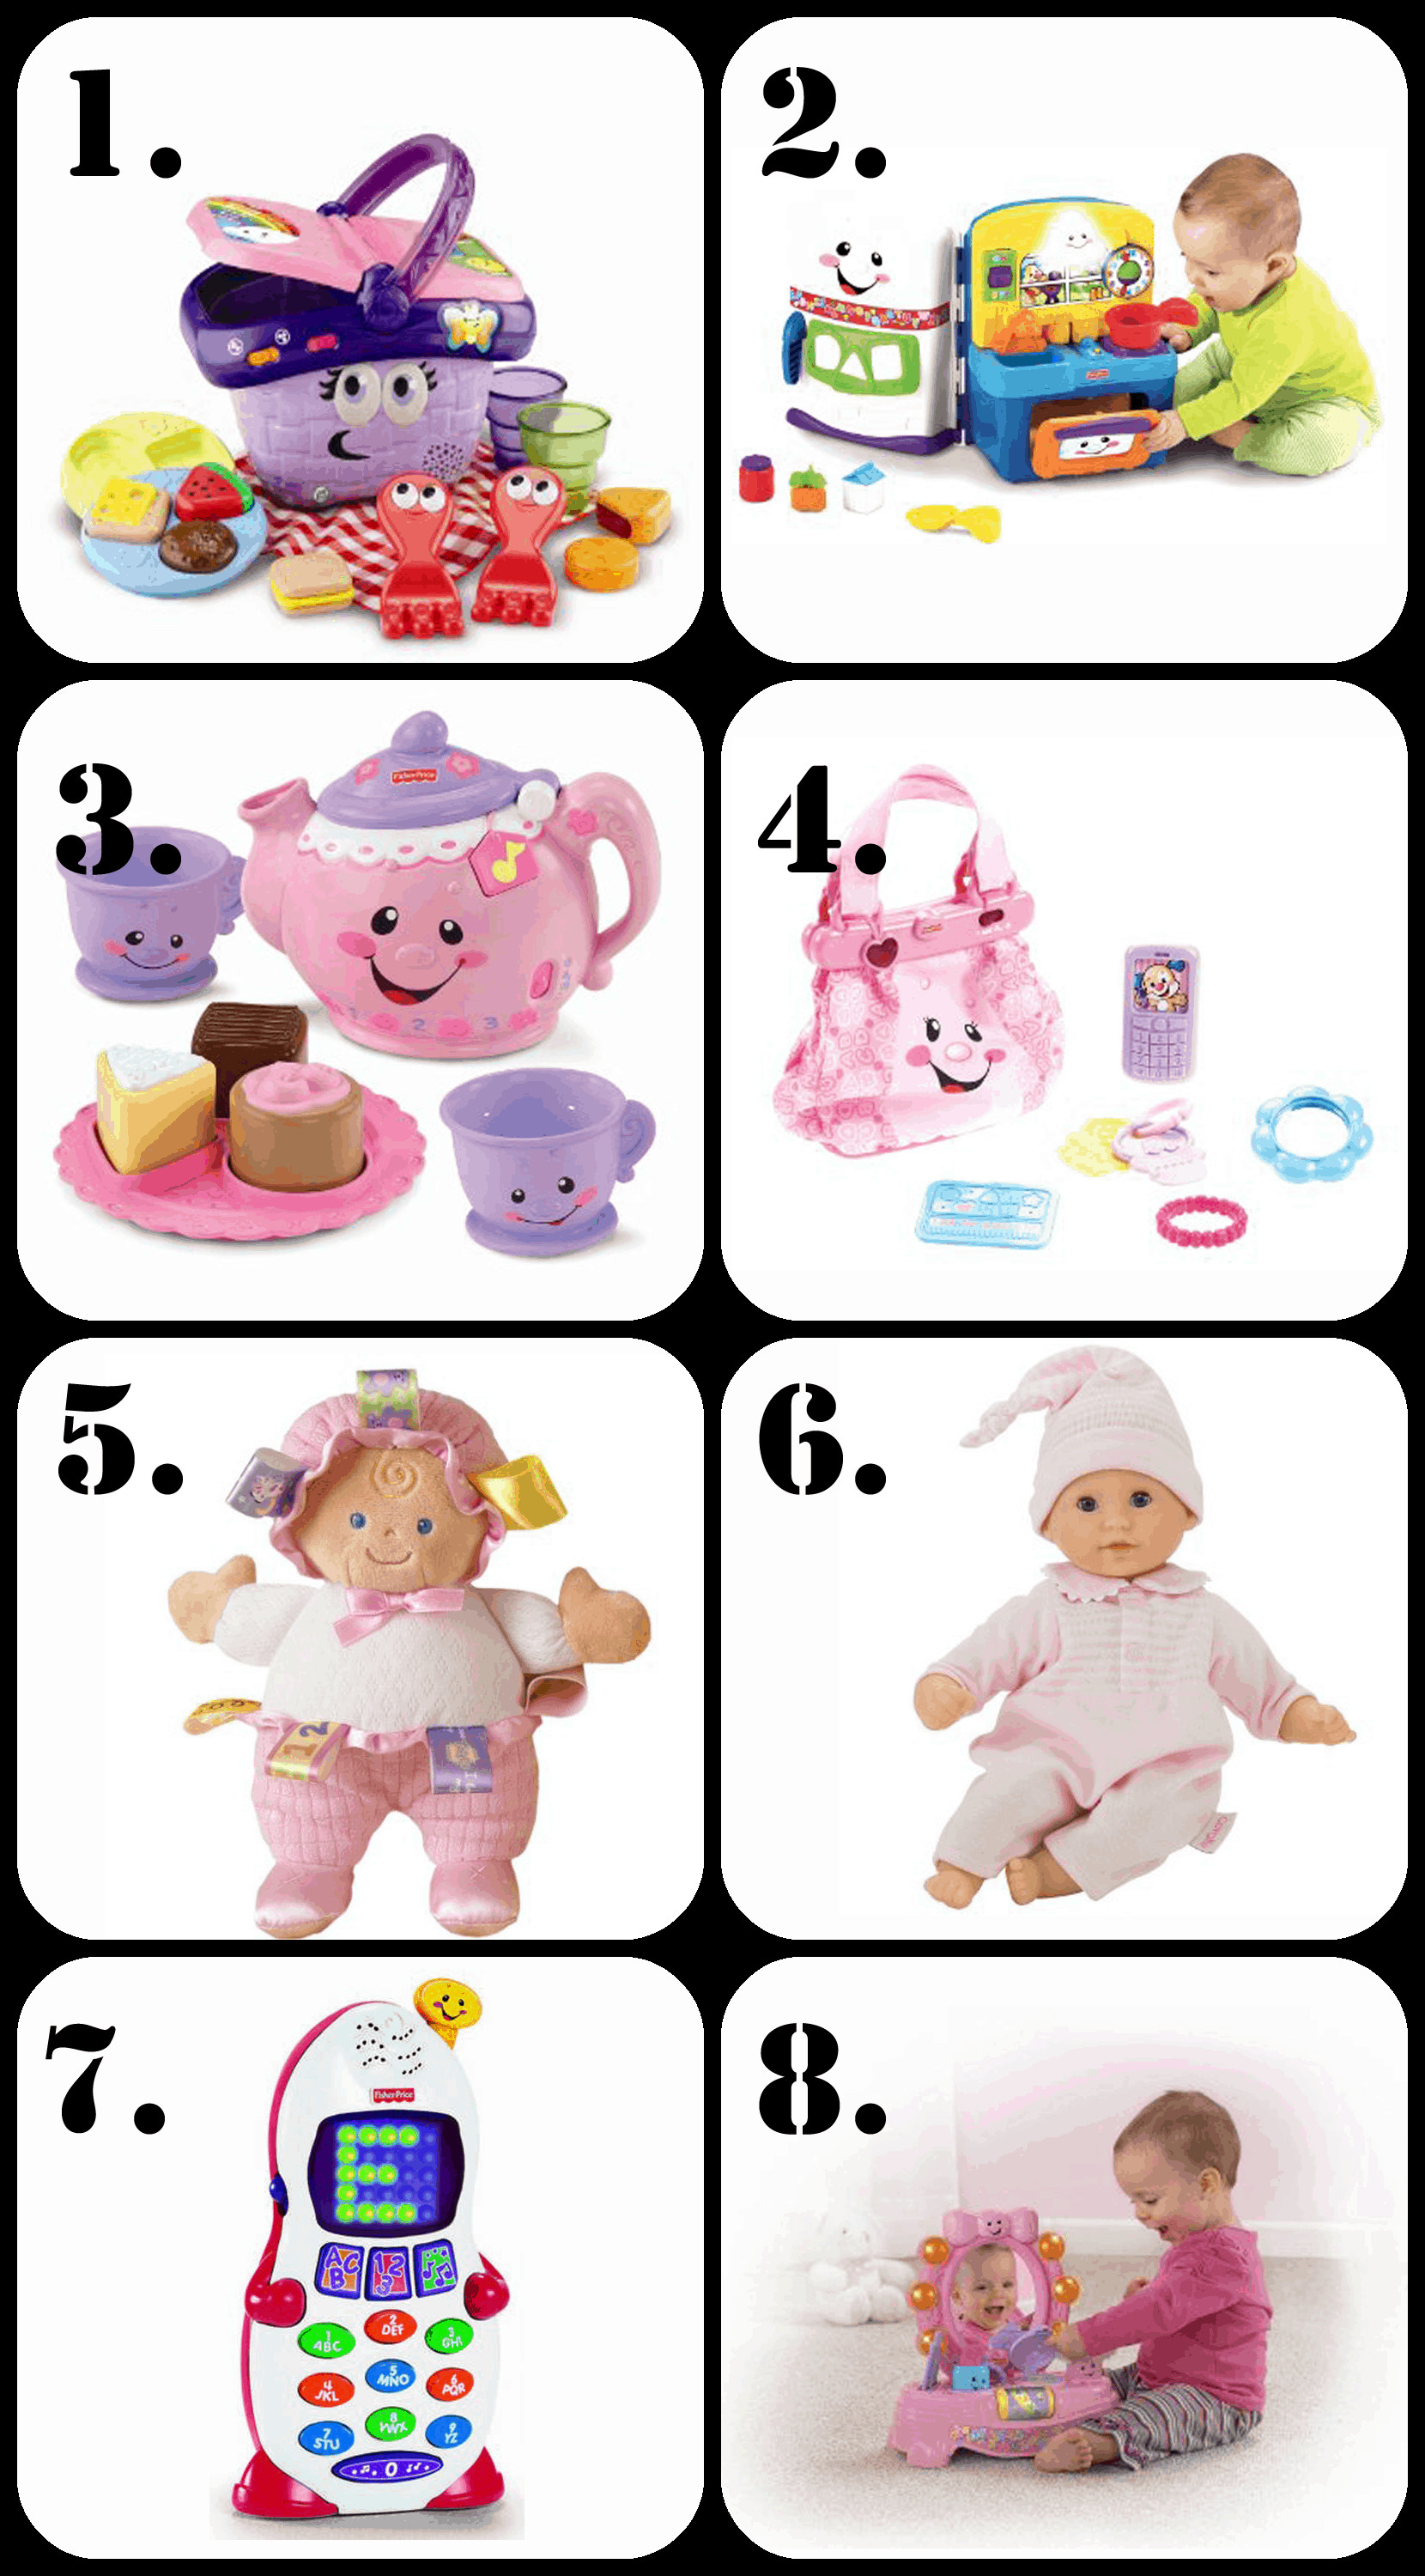 Birthday Gift Ideas For 2 Year Old Girl
 The Ultimate List of Gift Ideas for a 1 Year Old Girl